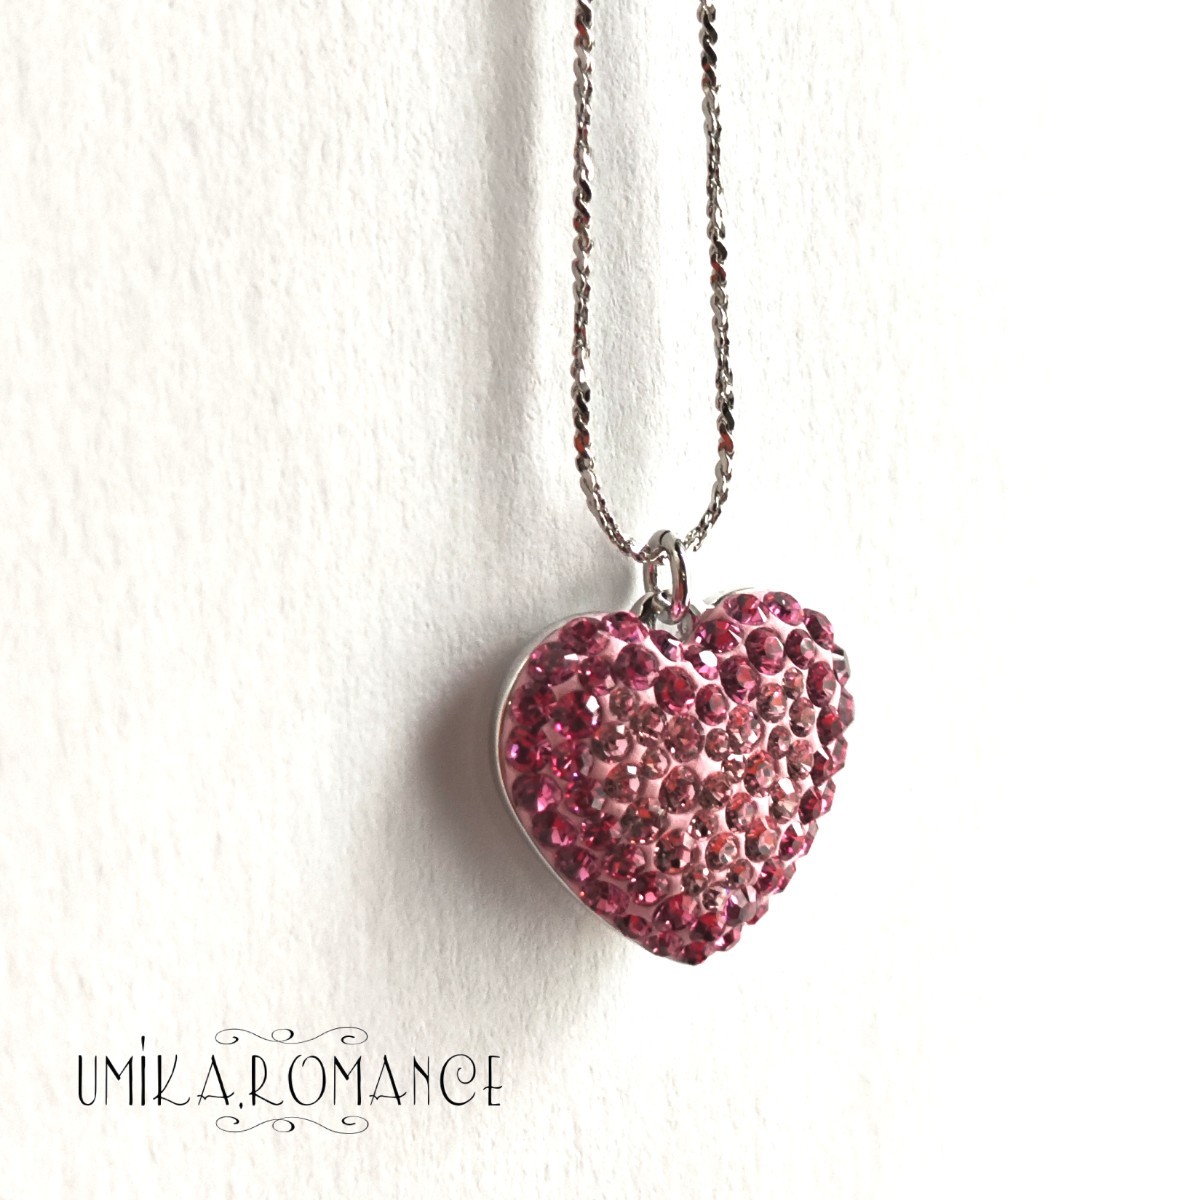  stamp entering pink. Heart pave necklace * hand made 